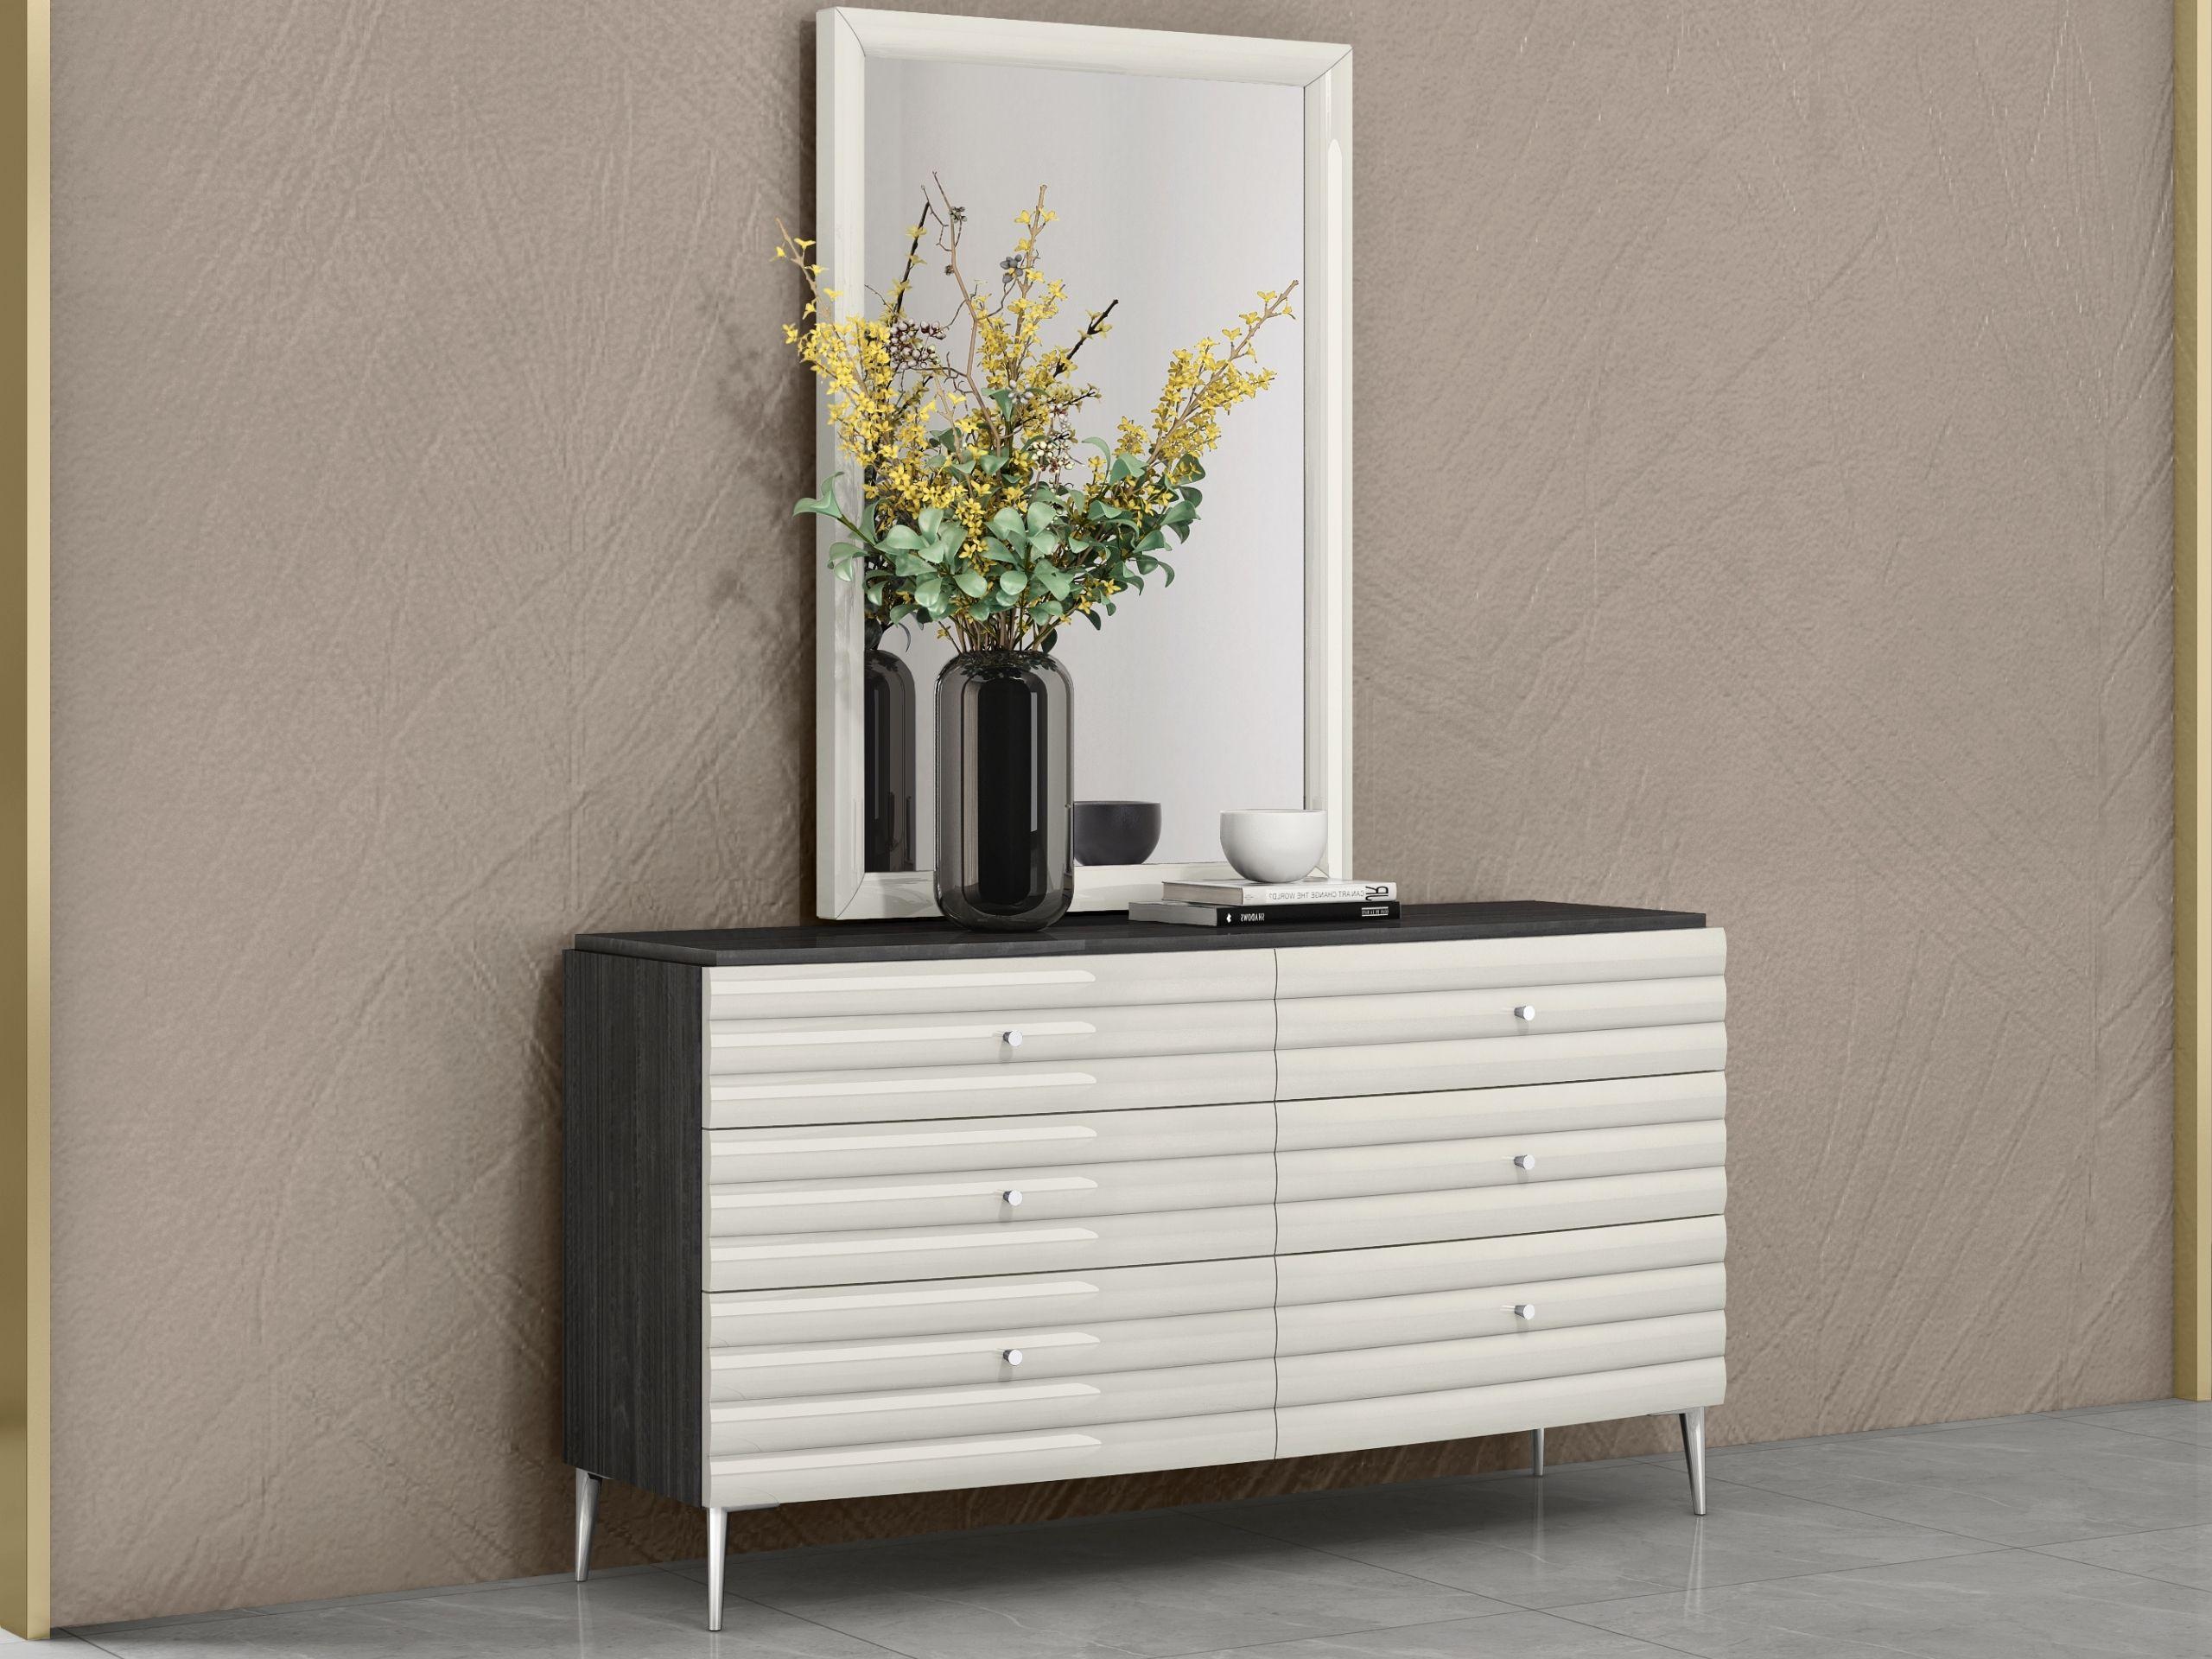 

    
WhiteLine DR1752-DGRY/LGRY-2PC Pino Dresser w/Mirror Dark Gray DR1752-DGRY/LGRY-2PC
